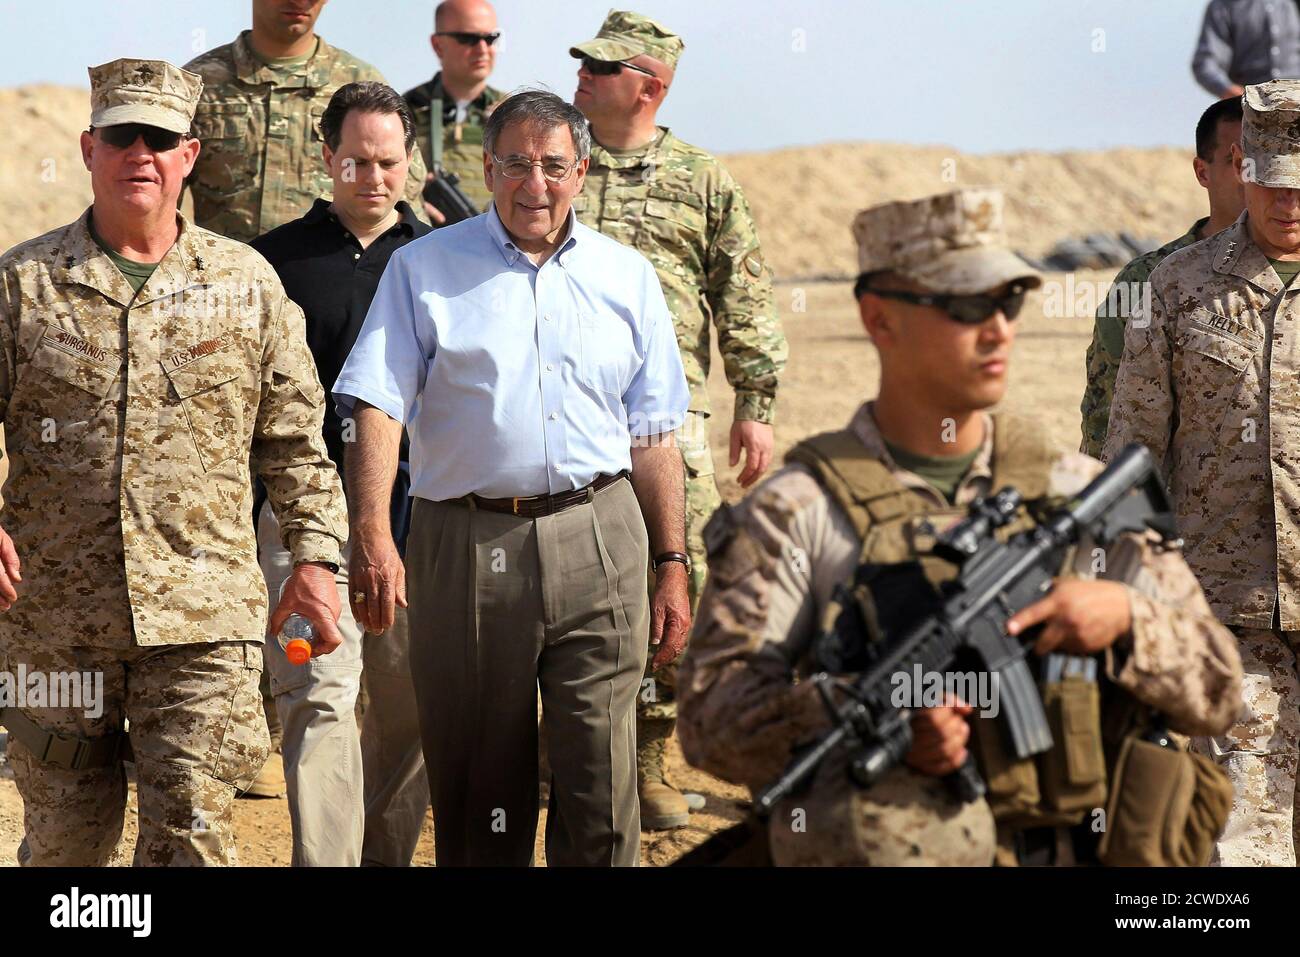 U.S. Secretary of Defense Leon Panetta (C) leaves after visiting with troops from the 31st BN Light Infantry of the Georgian Army at Forward Operating Base Shukvani, March 14, 2012. Panetta told troops in Afghanistan on Wednesday that the massacre of 16 Afghan civilians by an American soldier should not deter them from their mission to secure the country ahead of a 2014 NATO withdrawal deadline.  REUTERS/Scott Olson/Pool (AFGHANISTAN - Tags: POLITICS MILITARY) Stock Photo